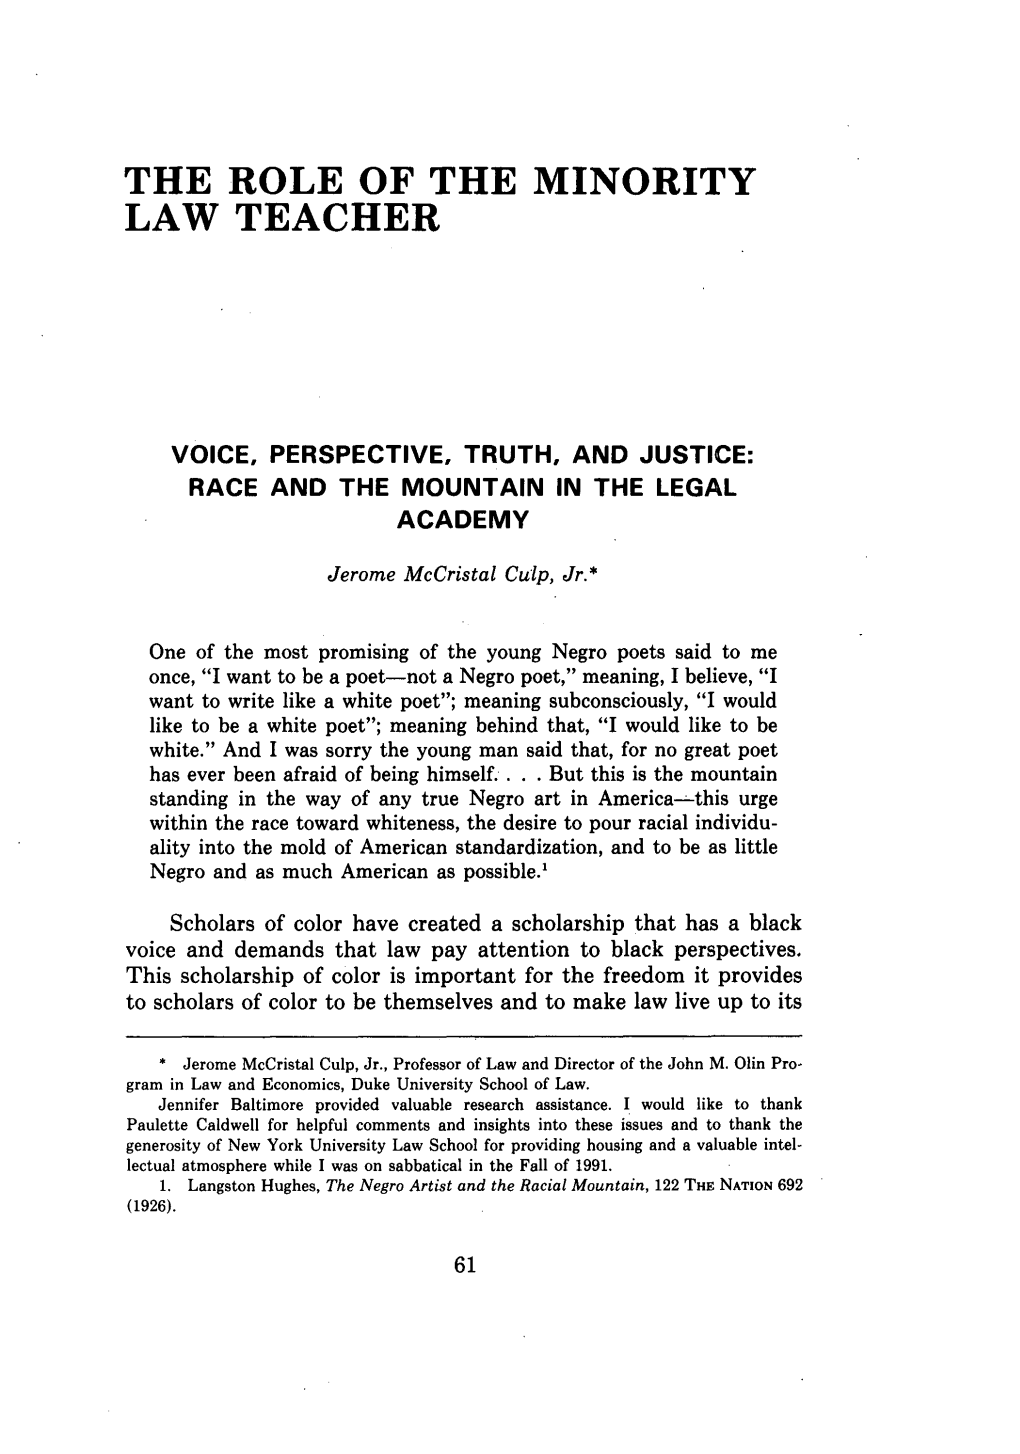 Voice, Perspective, Truth, and Justice: Race and the Mountain in the Legal Academy